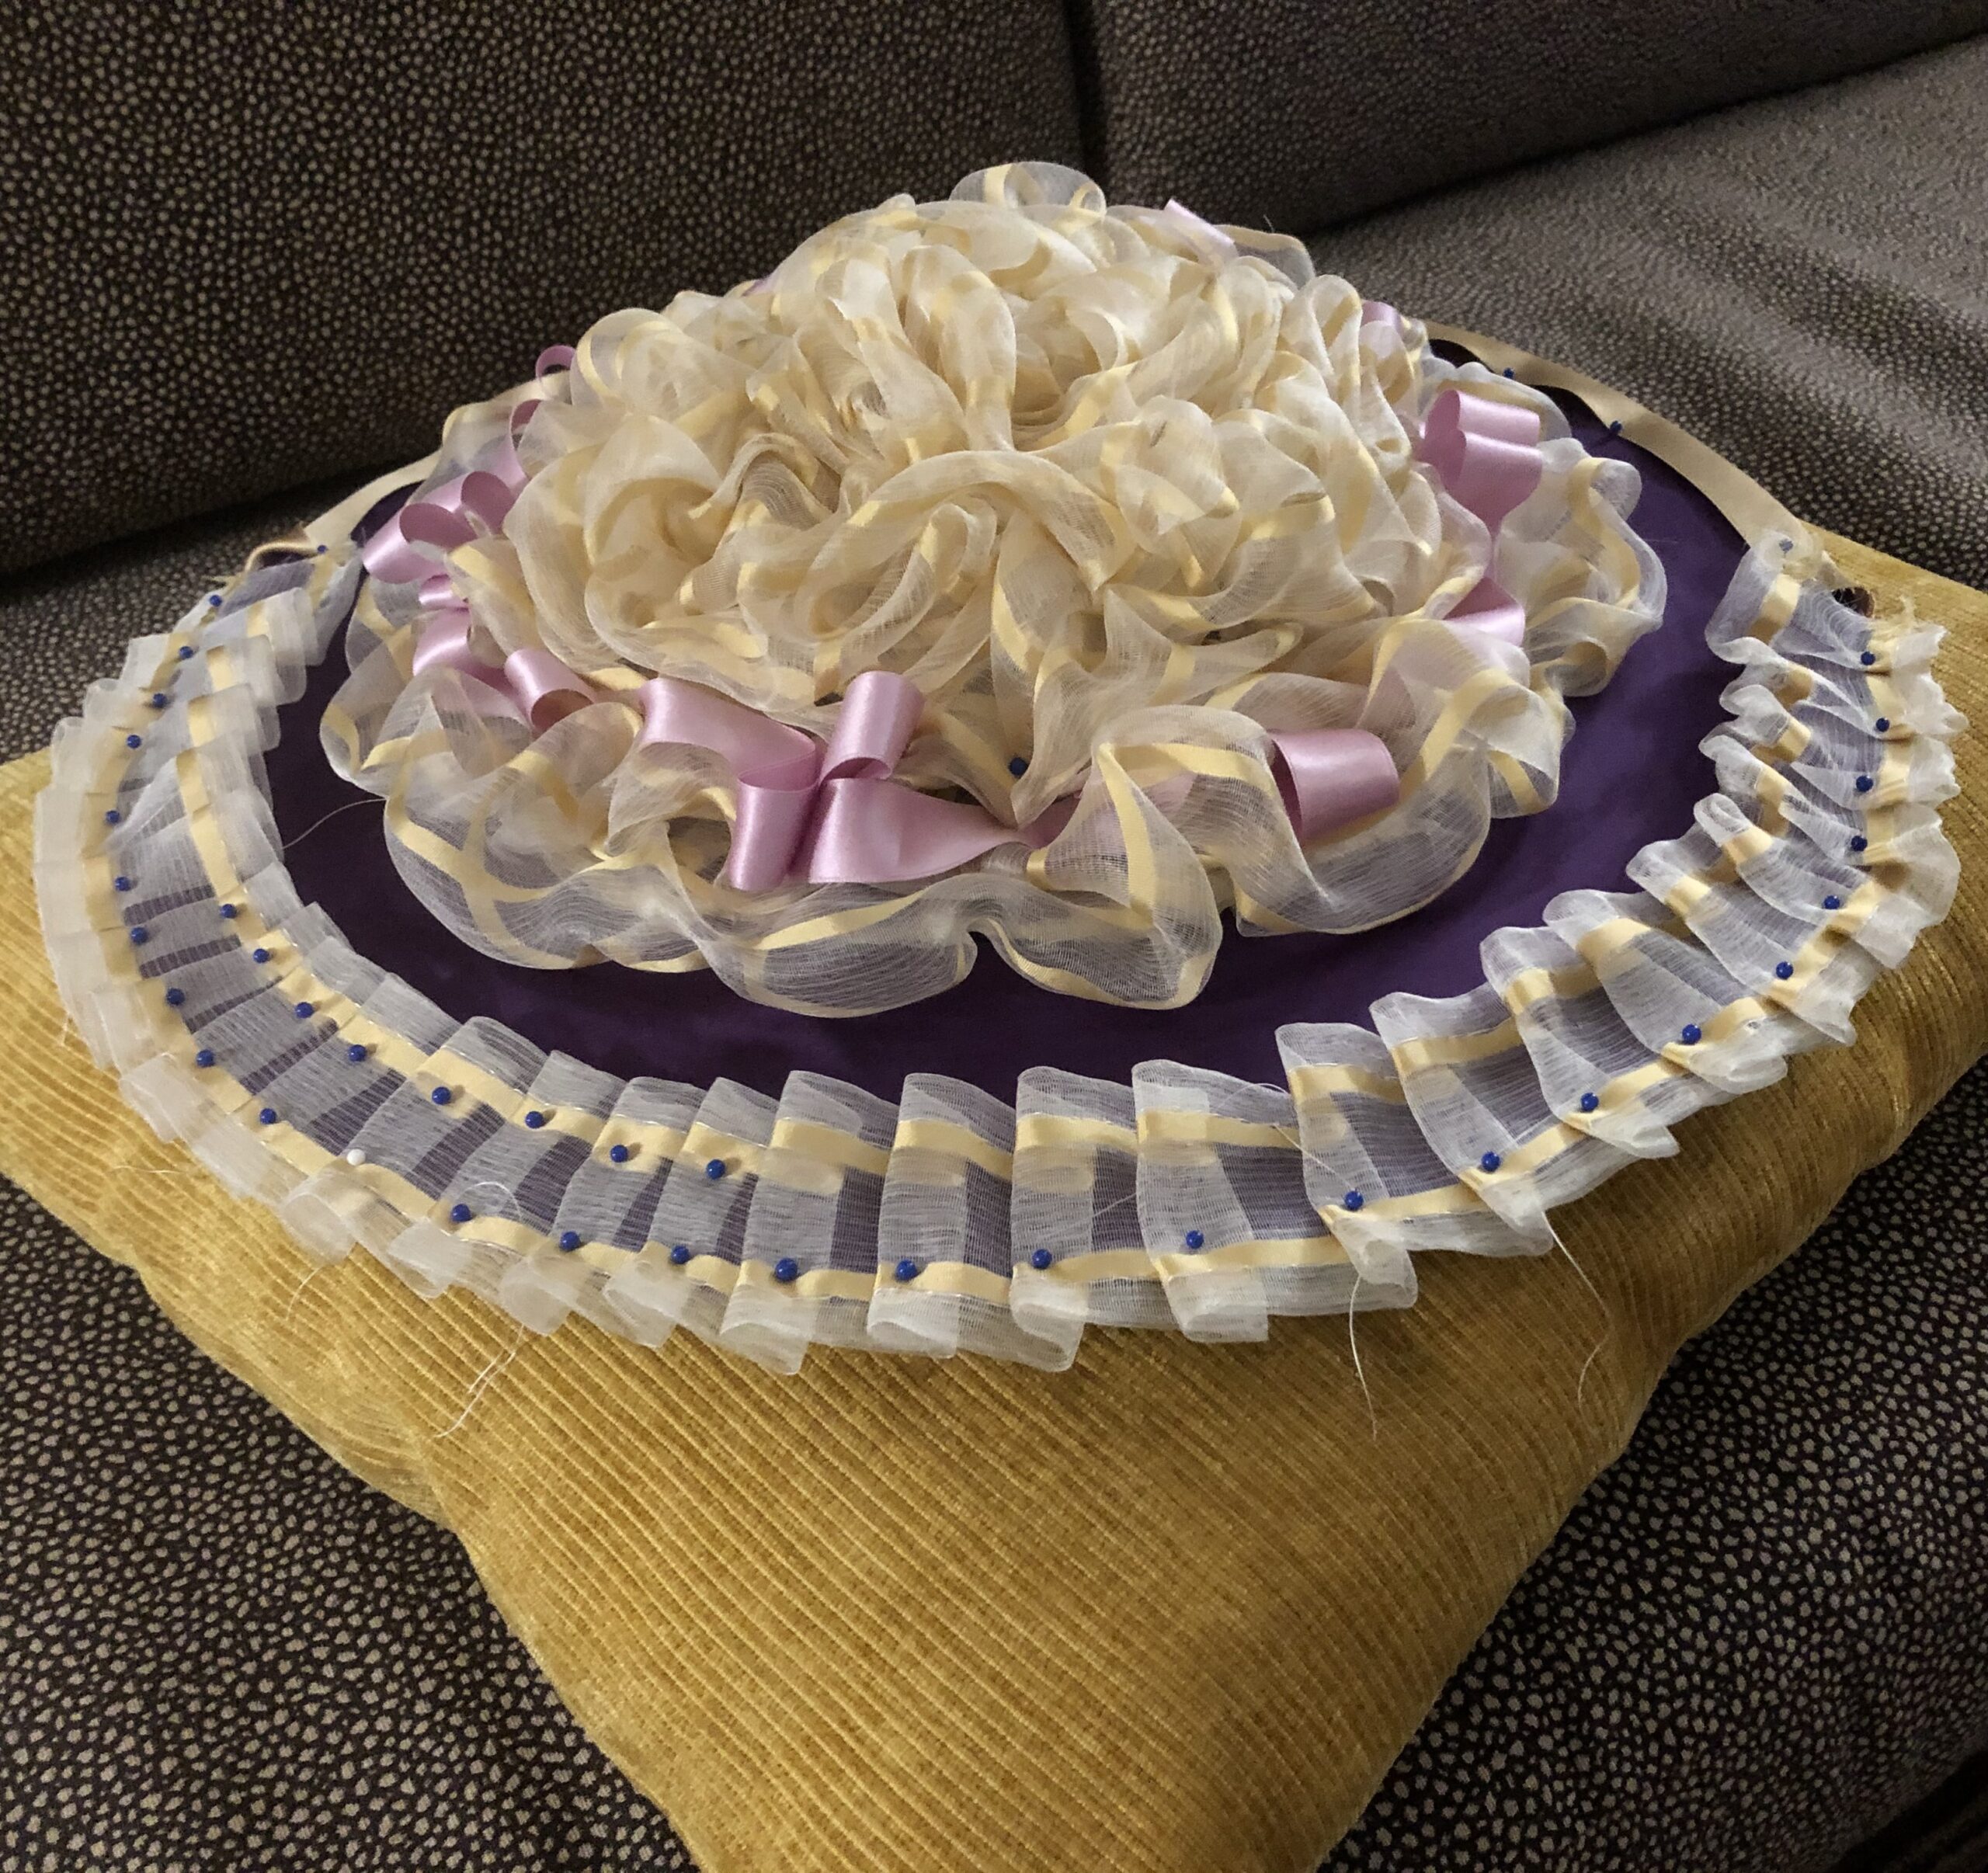 A trimmed 18th Century bergere hat sits on a sofa cushion.